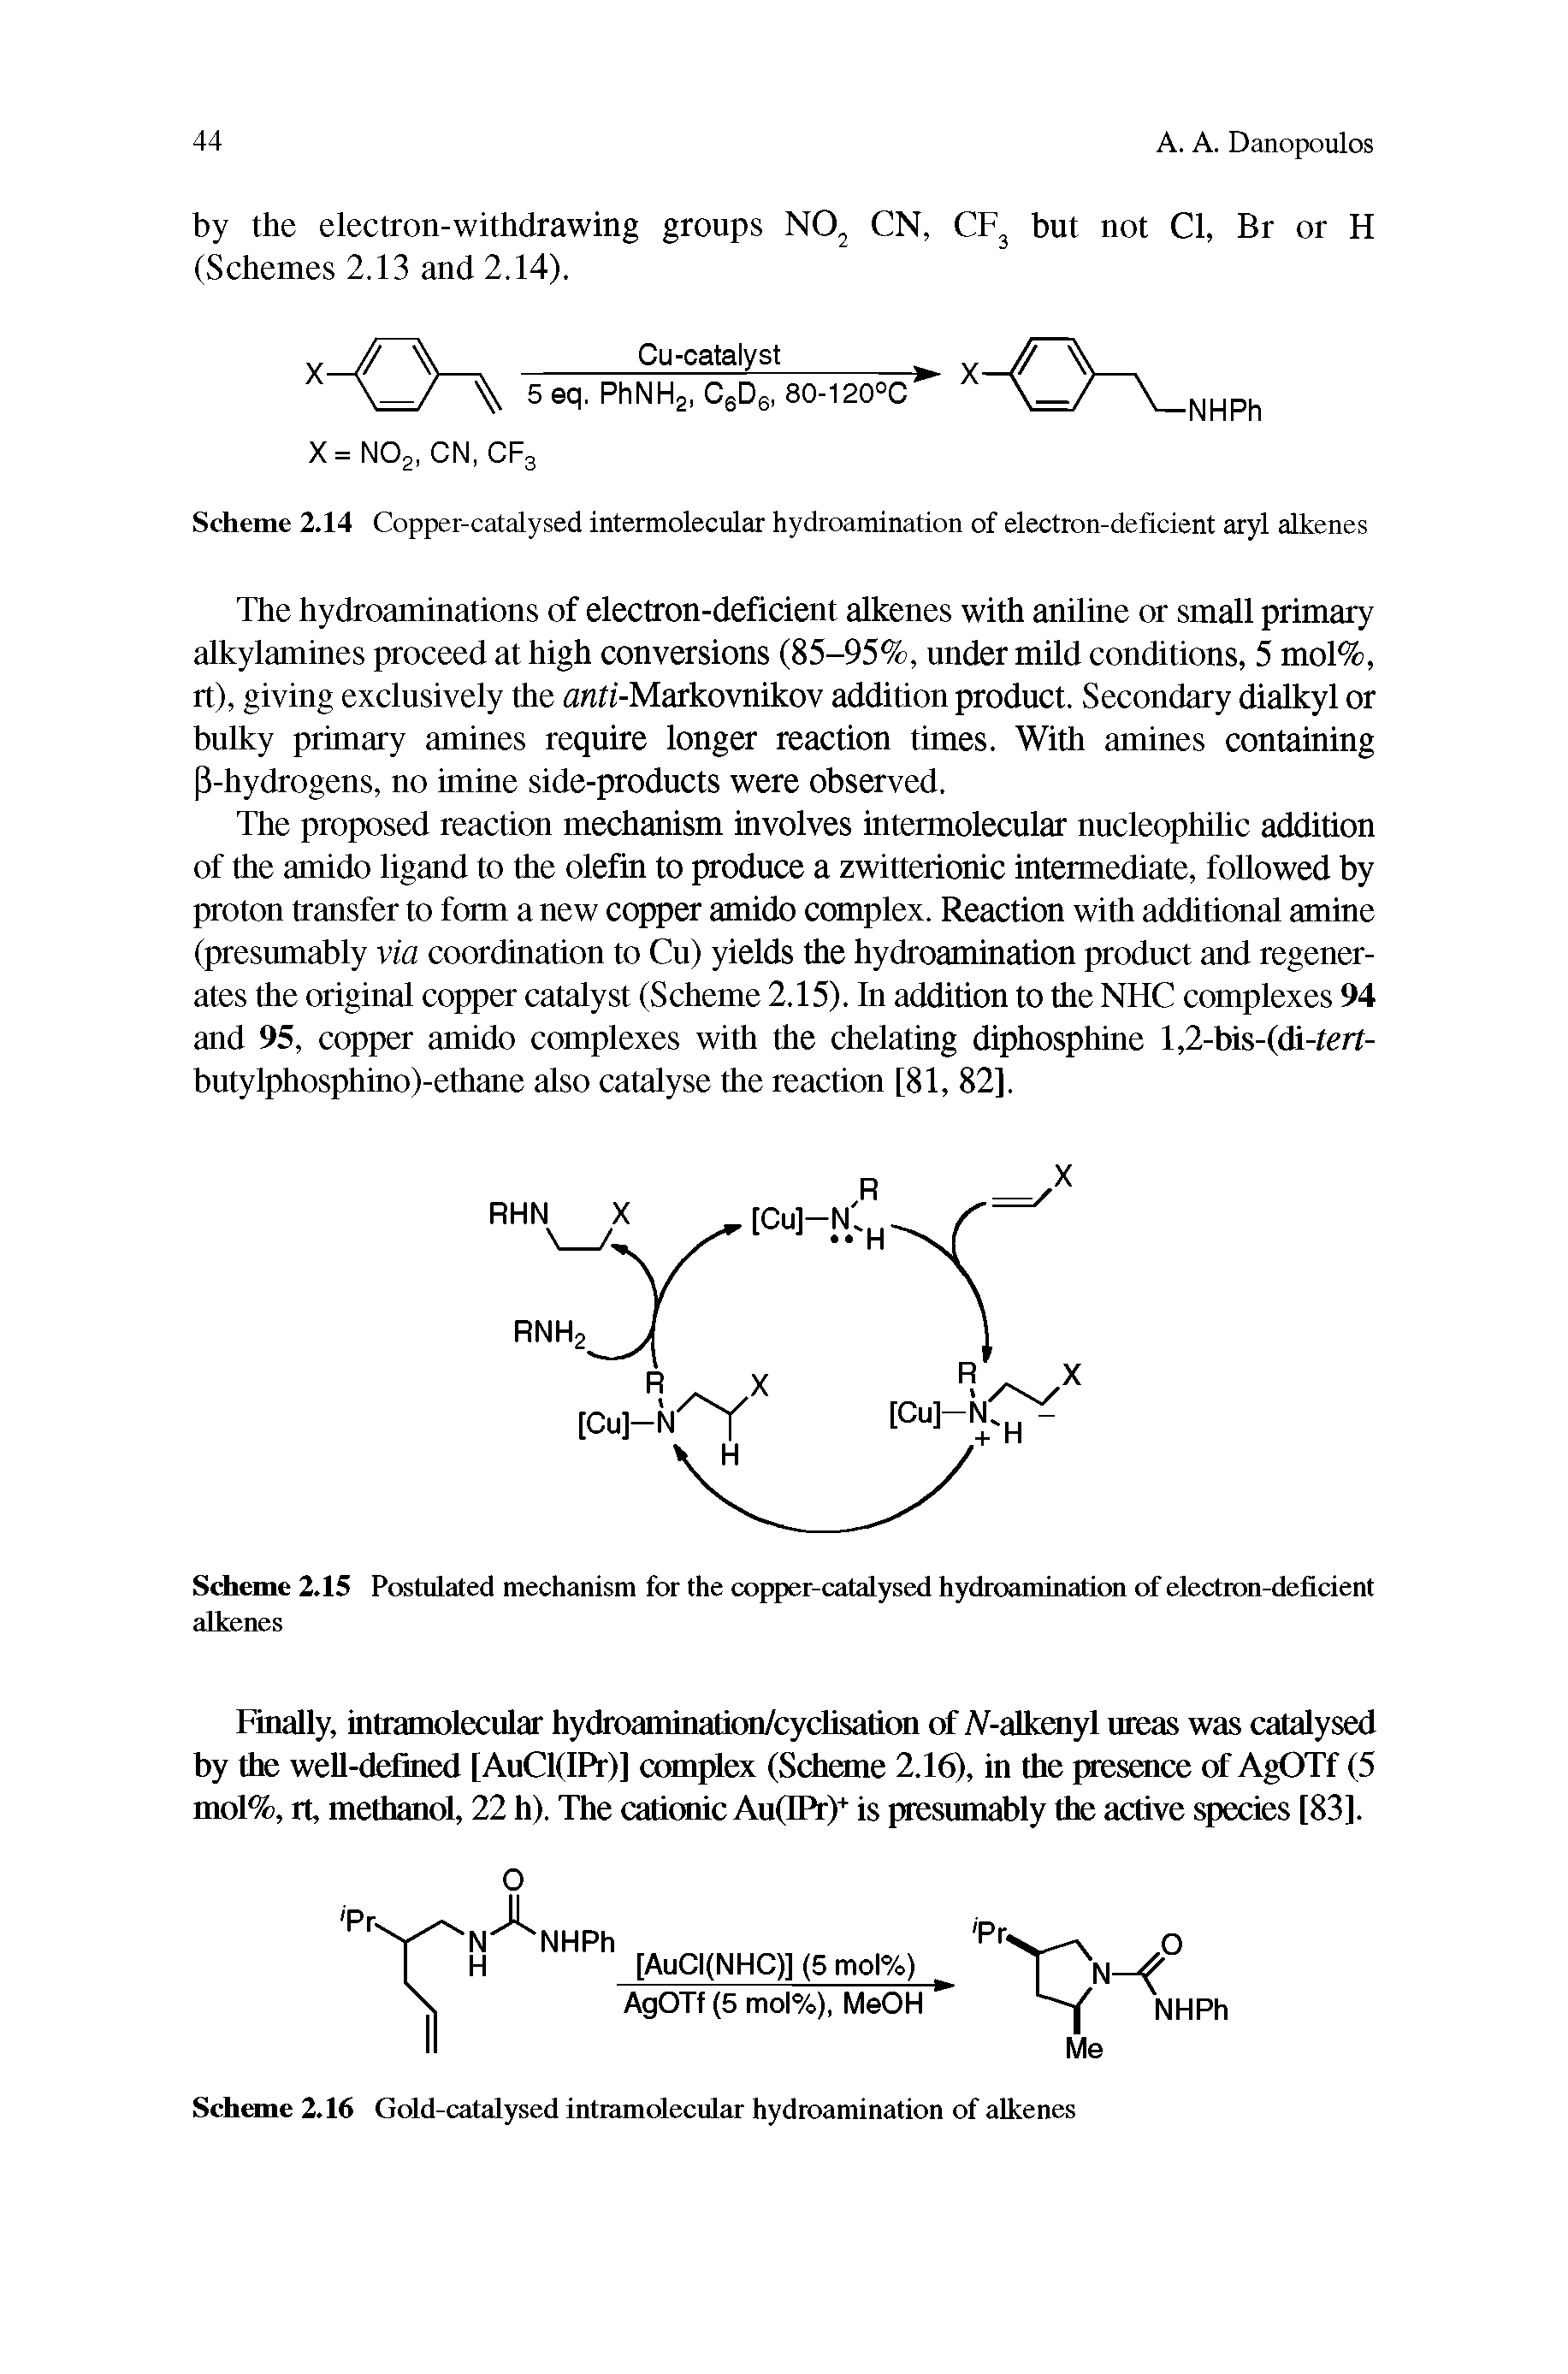 Scheme 2.15 Postulated mechanism for the copper-catalysed hydroamination of electron-deficient alkenes...